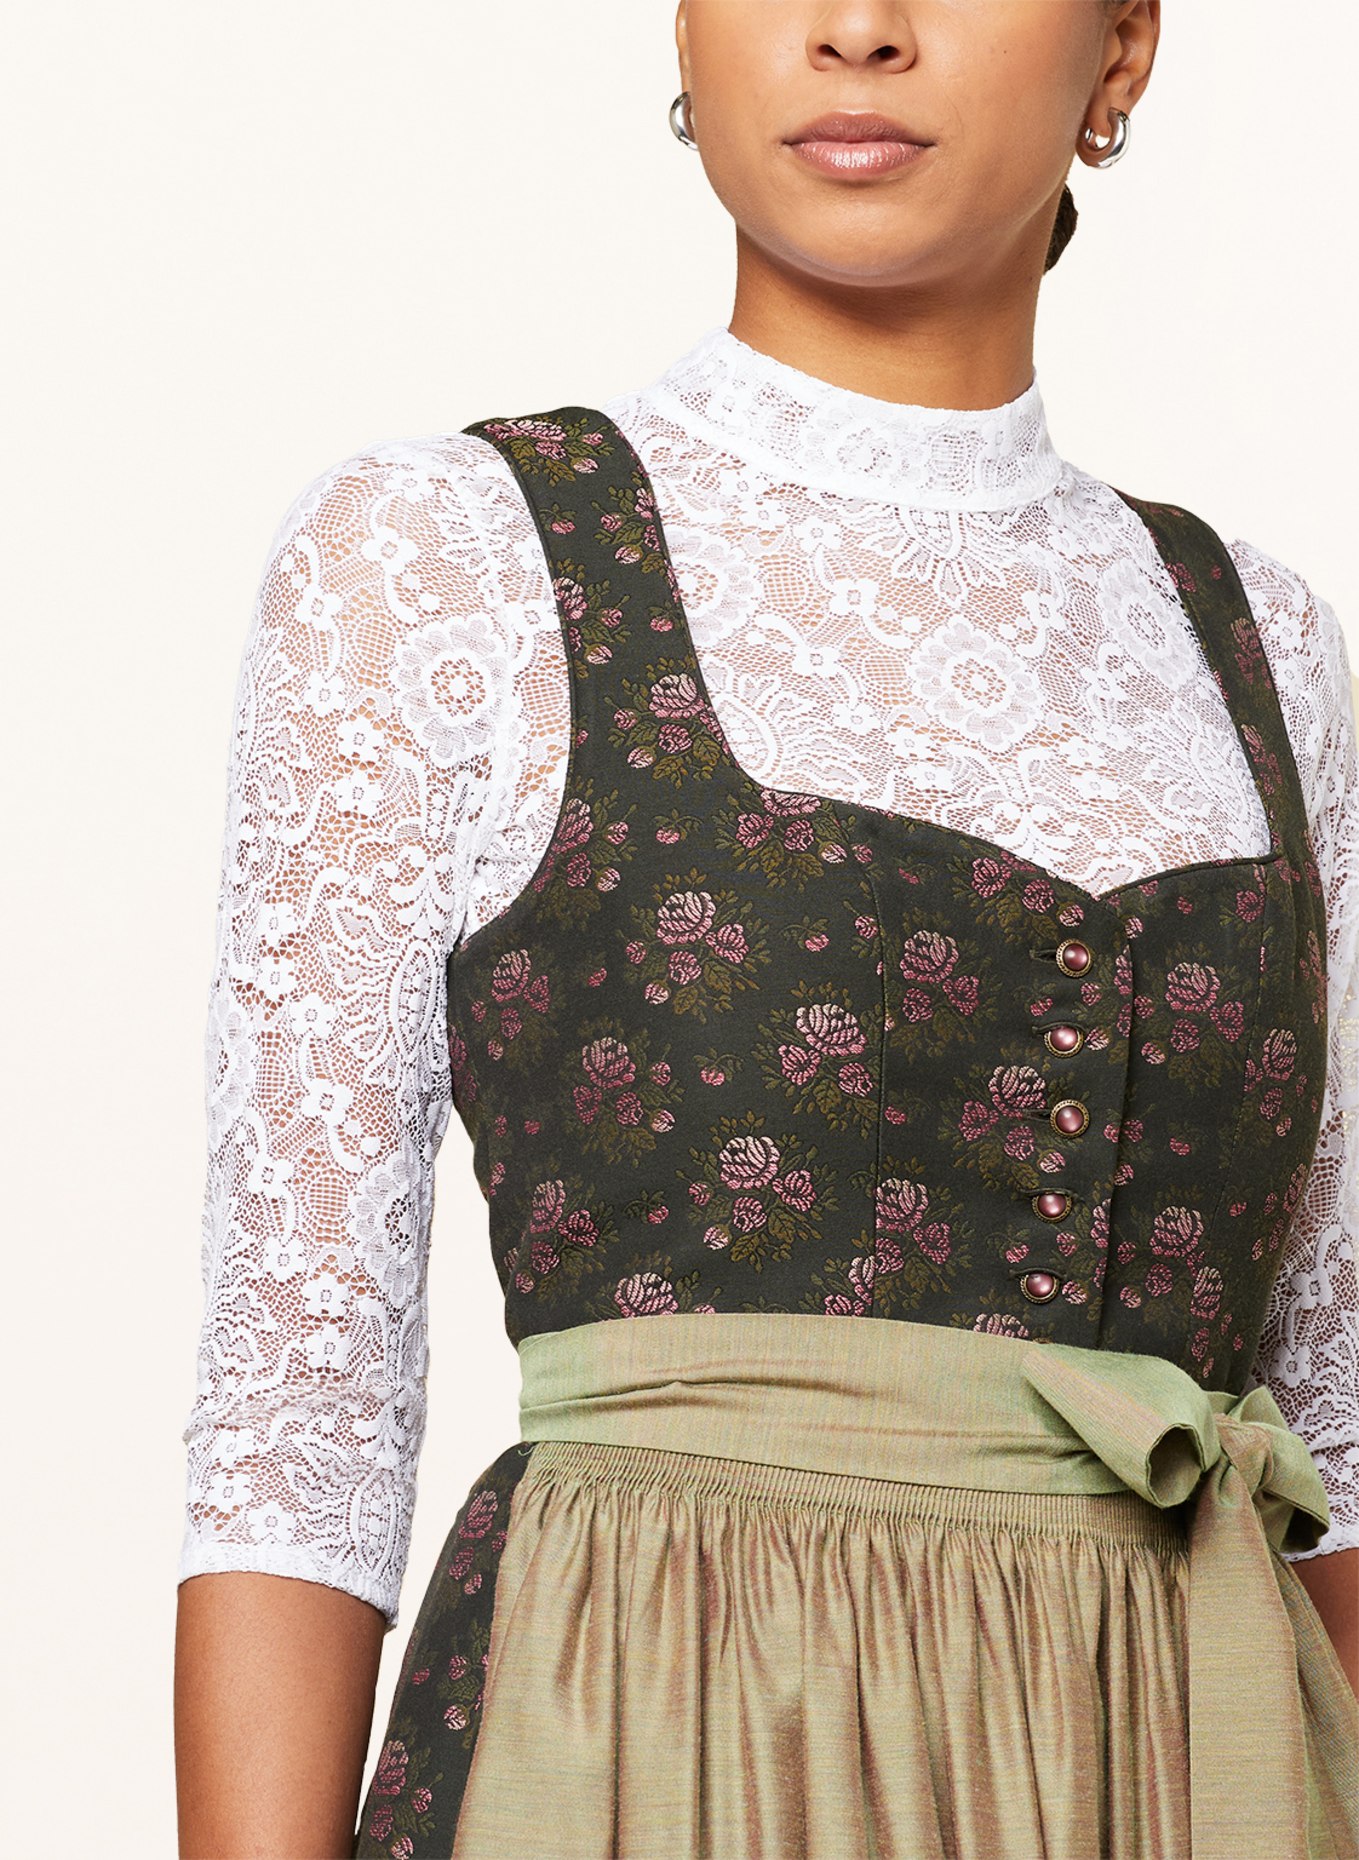 SPORTALM Dirndl blouse CARLA made of lace in white